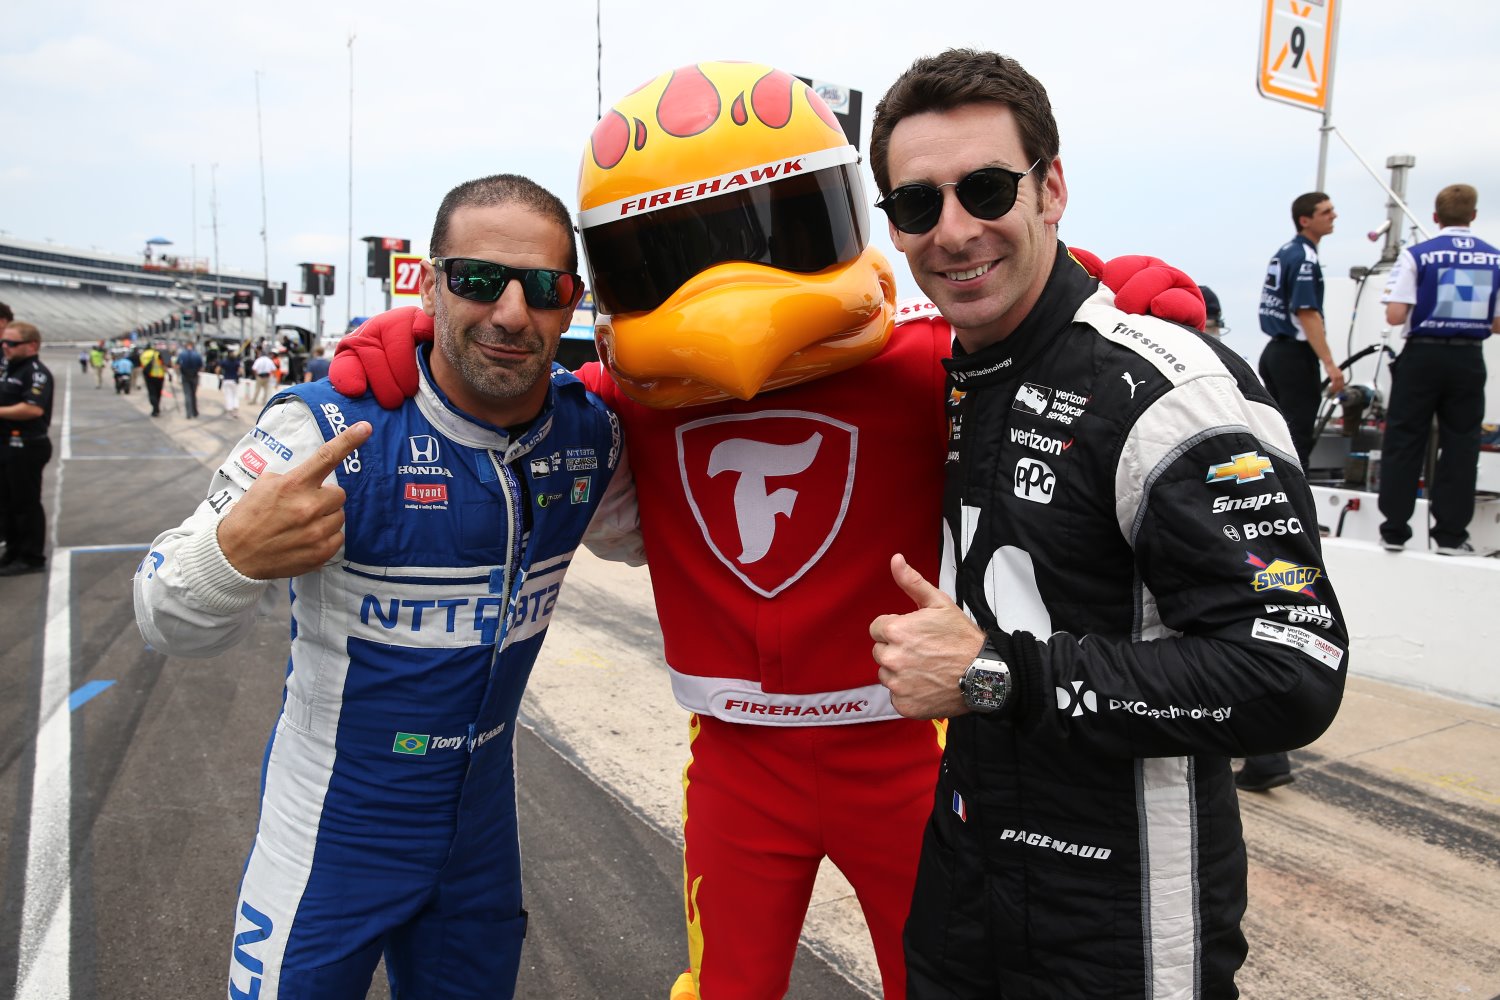 Kanaan and Pagenaud were 2nd and 3rd